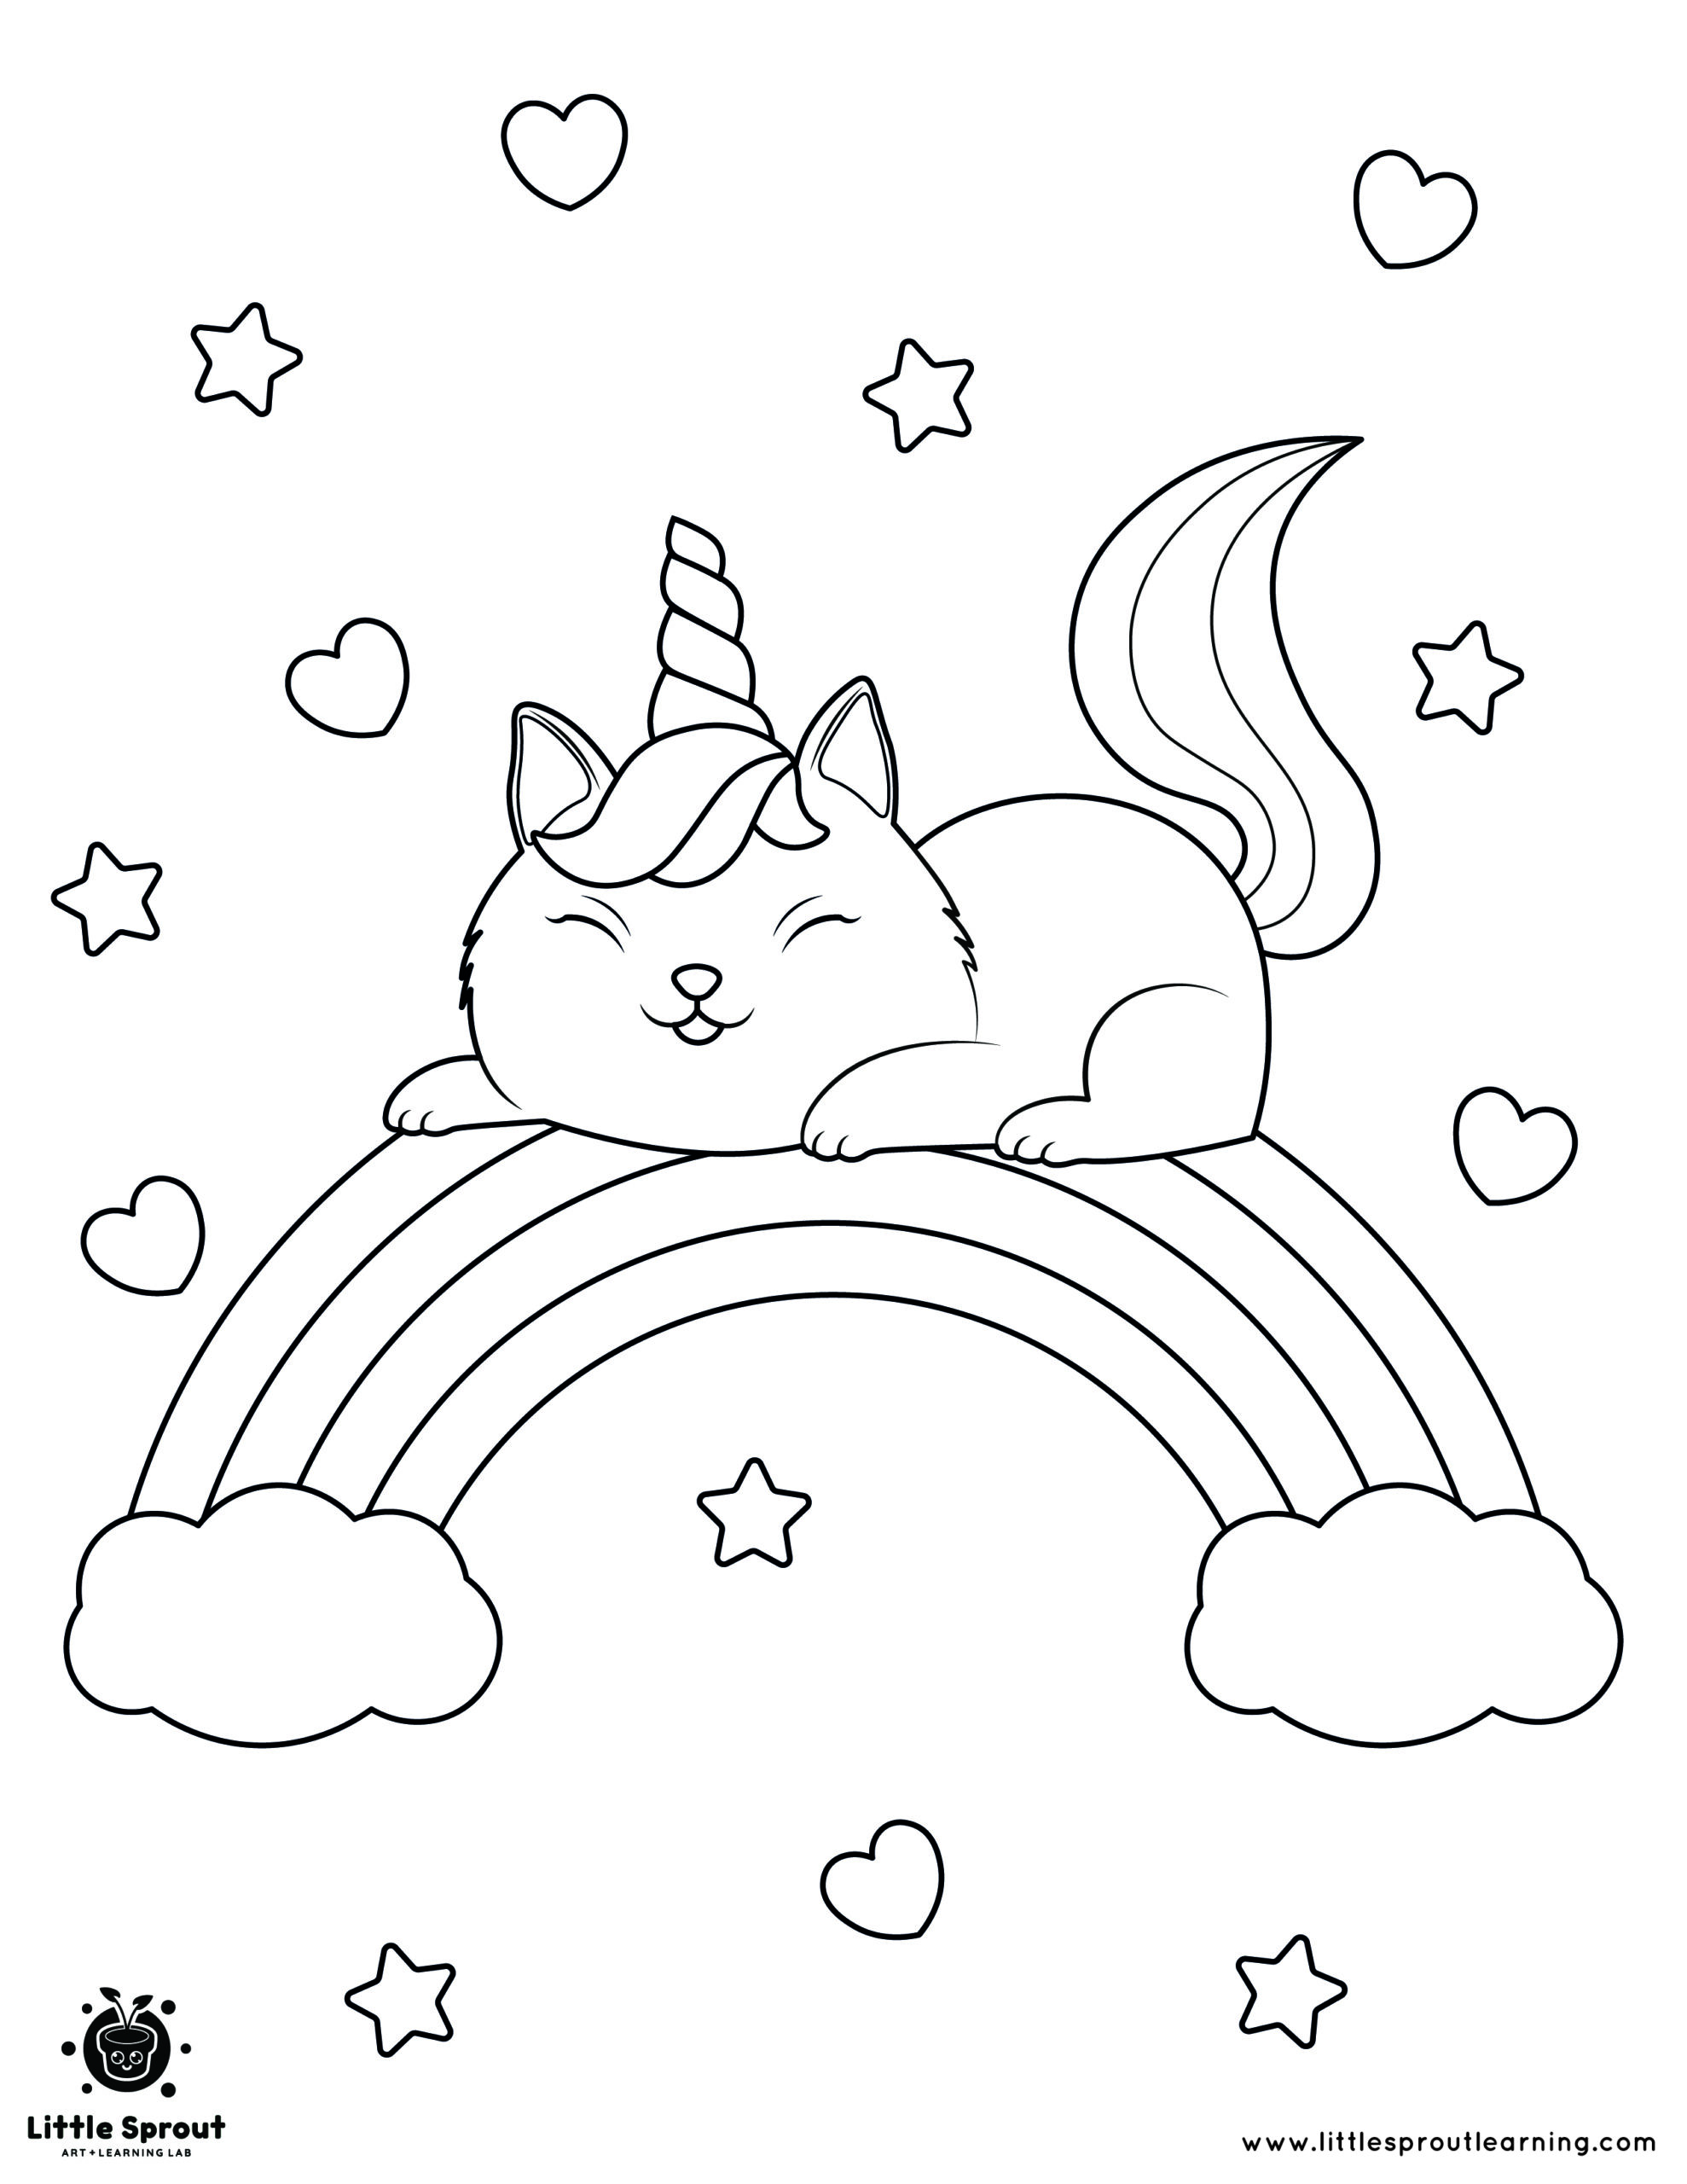 Resting on a Rainbow Unicorn Cat Coloring Page